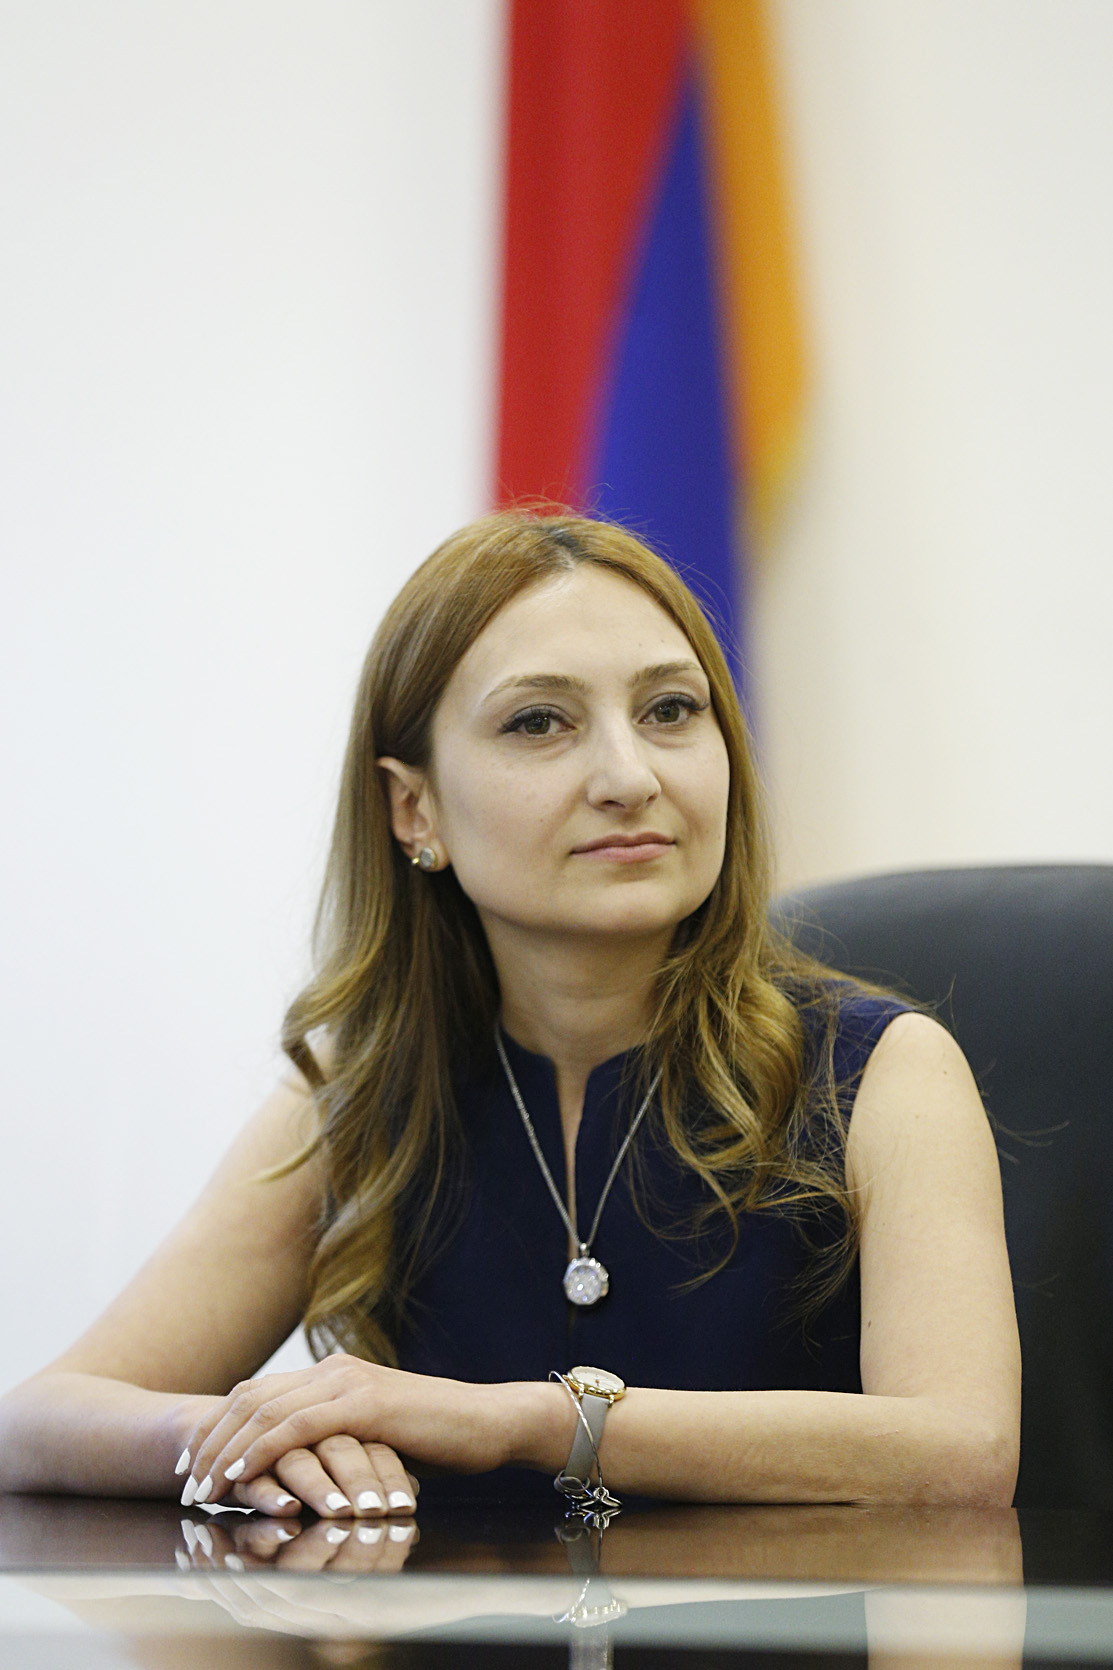 Lilit Makunts: Gender equality is and always has been a core value of our Armenian identity